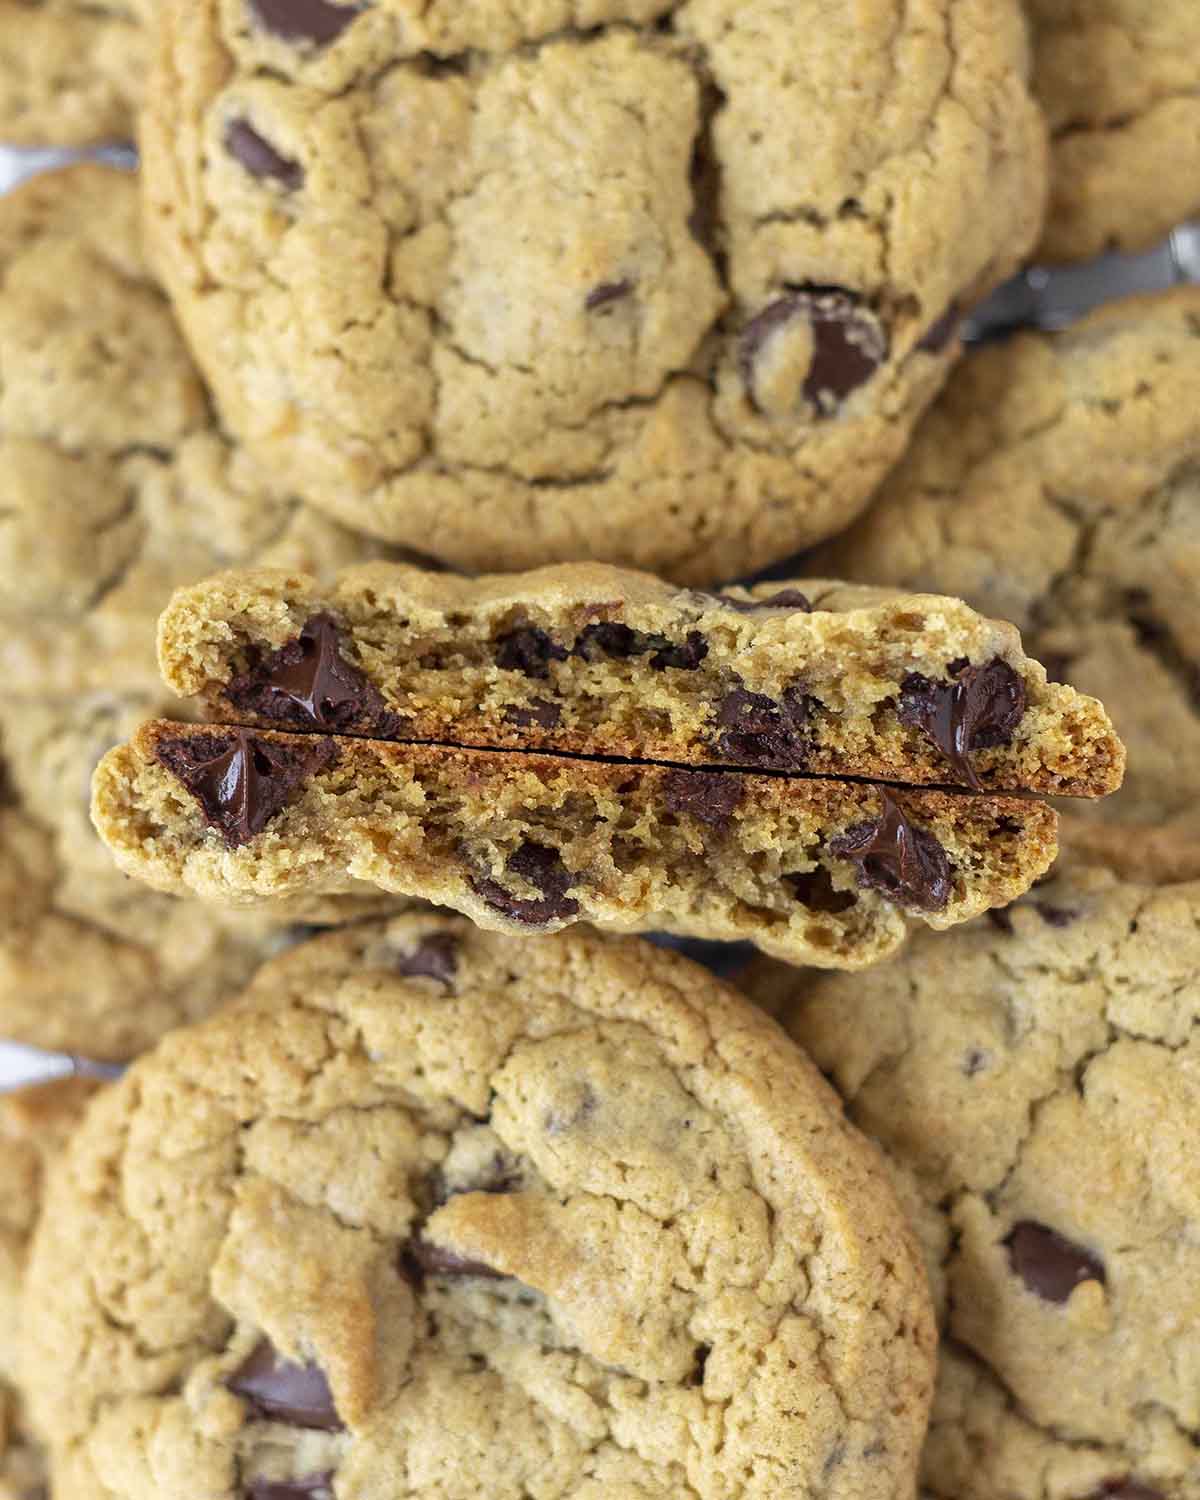 A close up shot showing the inside of an oatmeal flour chocolate chip cookie that has been broken in half.